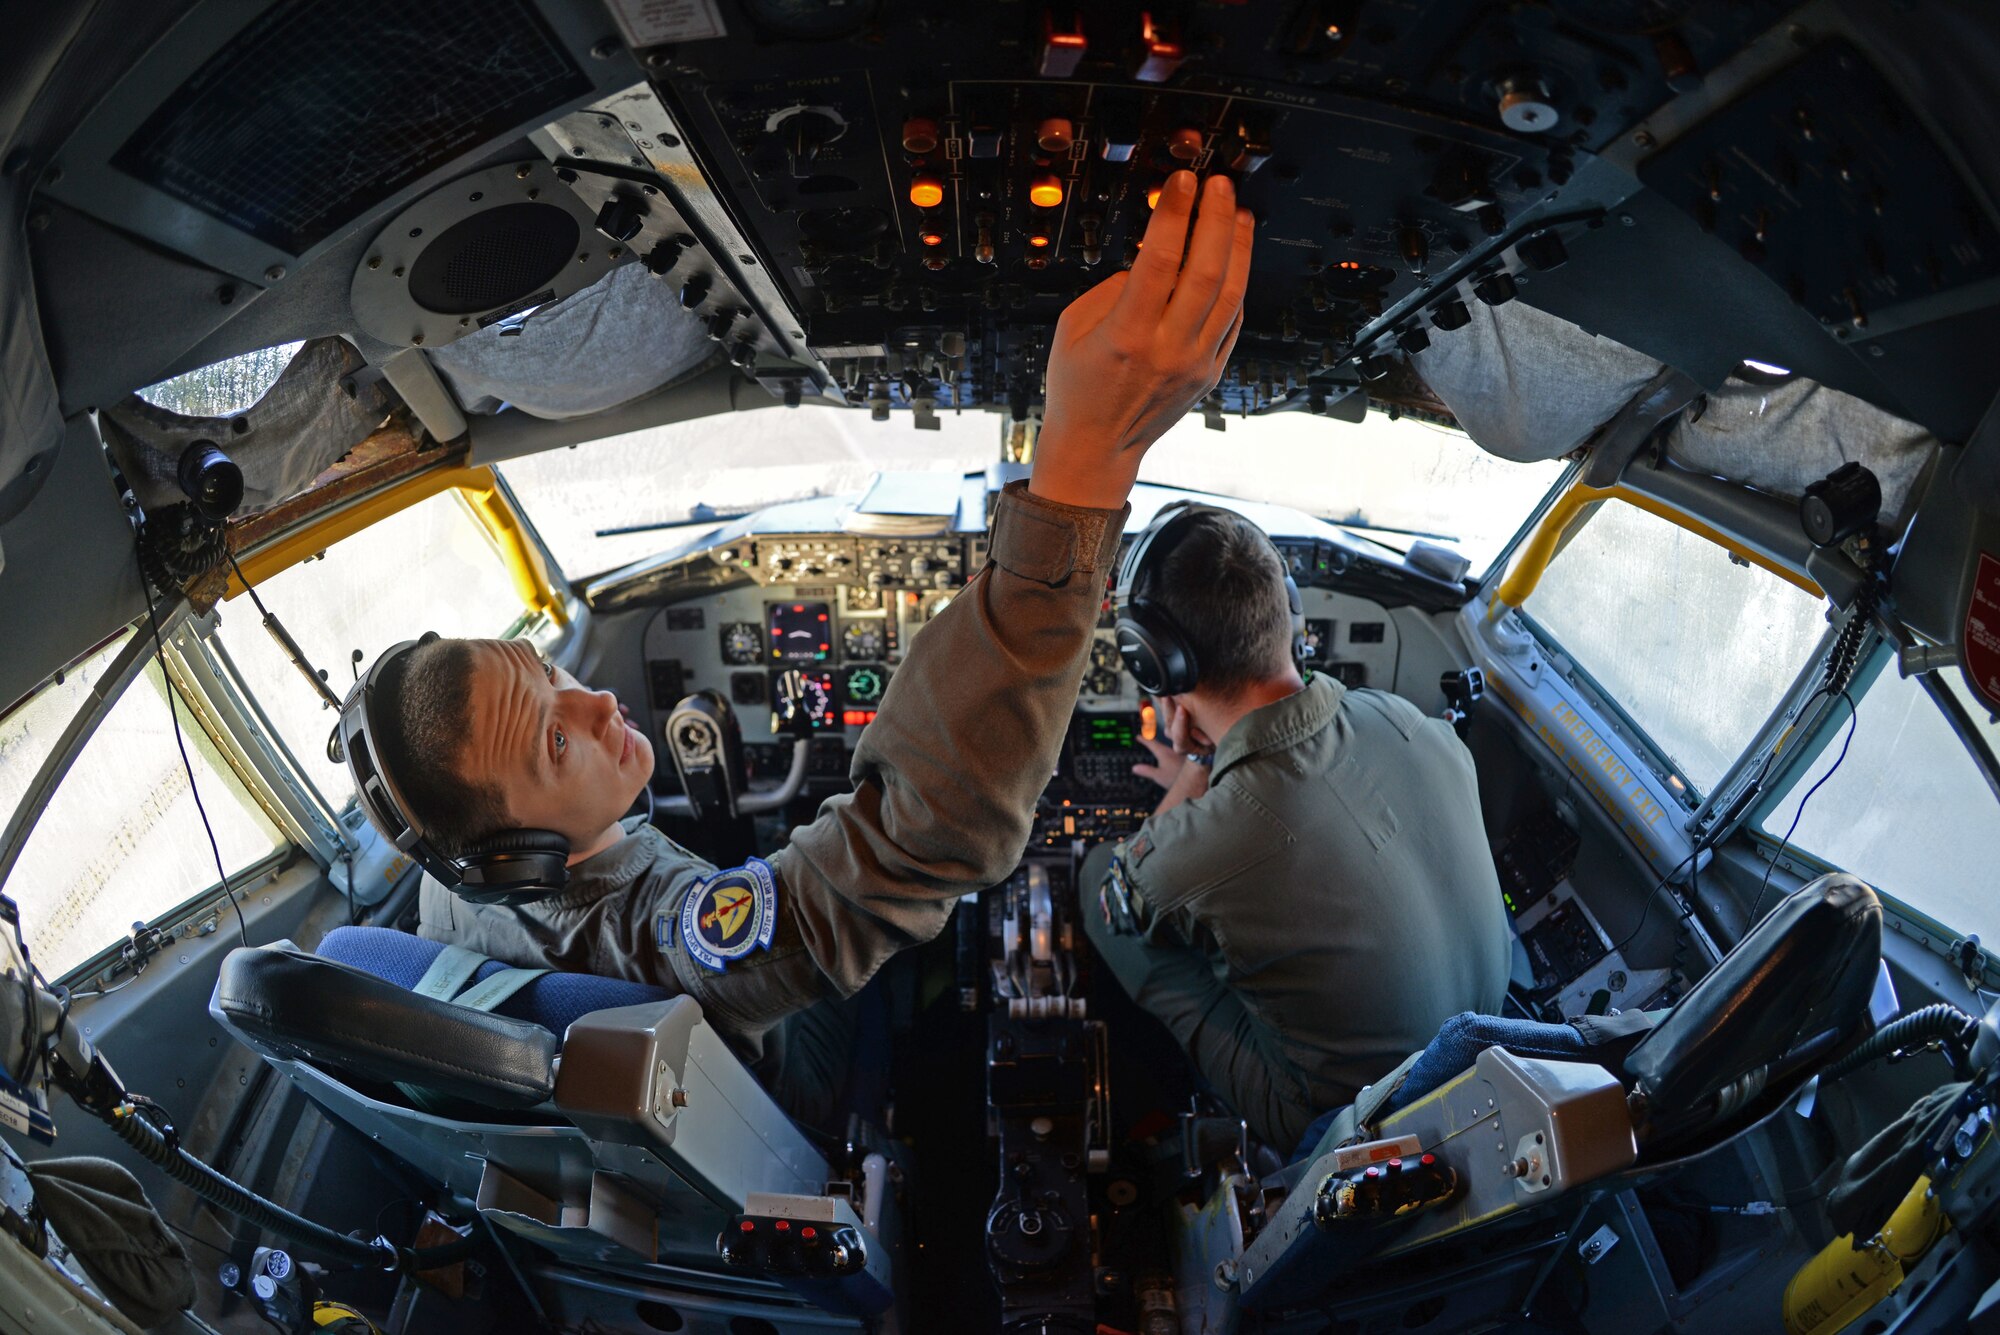 U.S. Air Force Capt. Ryan Nelson, left, and Maj. Matthew Boatman, 351st Air Refueling Squadron pilots, conduct pre-flight checks of a KC-135 Stratotanker prior to performing an air-refueling mission, at RAF Mildenhall, England, Sept. 15, 2018. The mission included the refueling of a B-52 Stratofortress from the 307th Bomb Wing at Barksdale, Louisiana, that is deployed to RAF Fairford, England. (U.S. Air Force photo by Senior Airman Luke Milano)